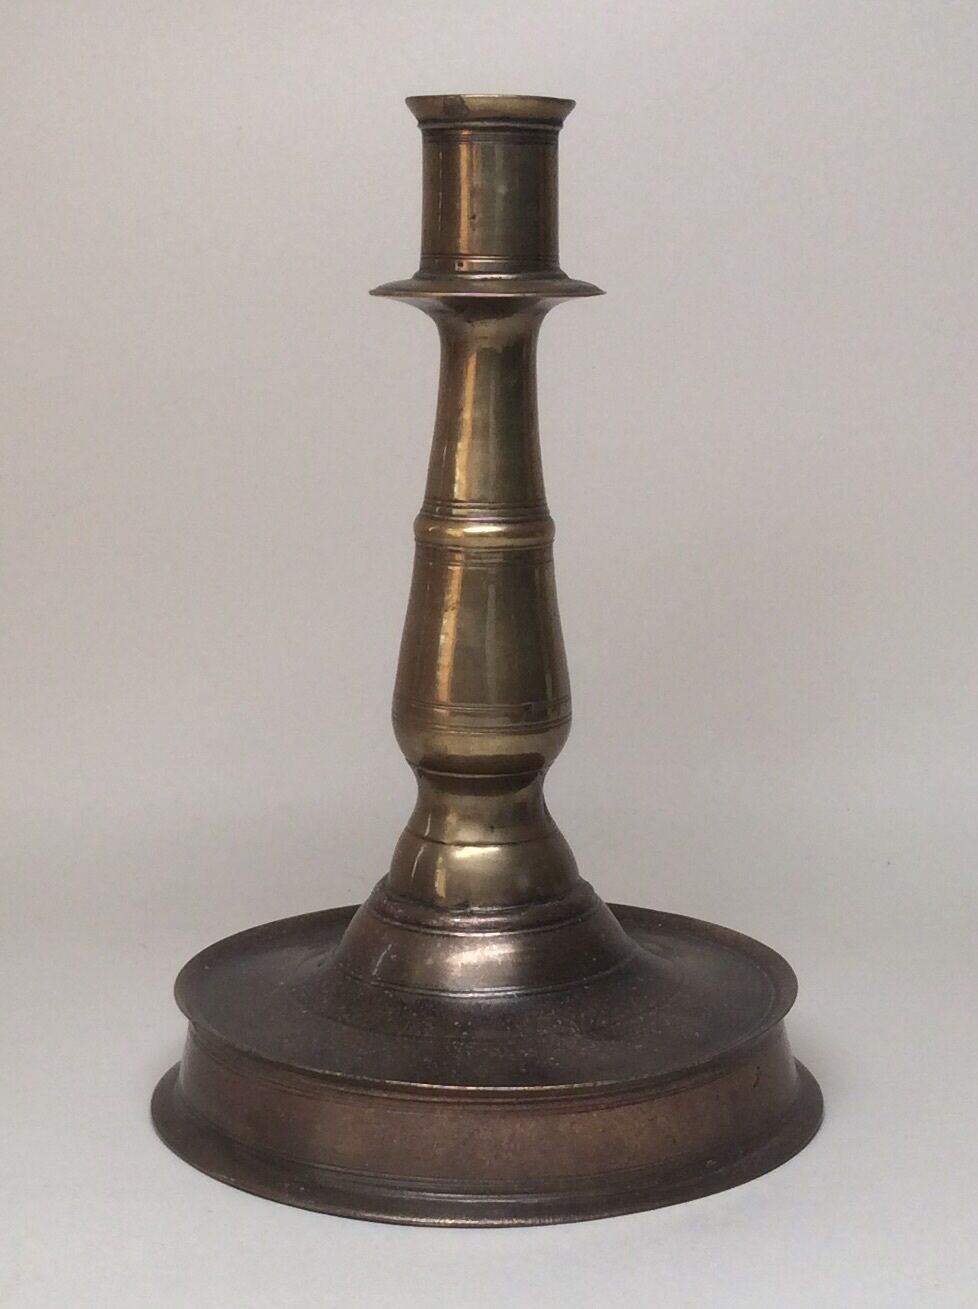 Early to Mid 17th Century Dutch Wide Based Bronze Socket Candlestick. 16th 18th